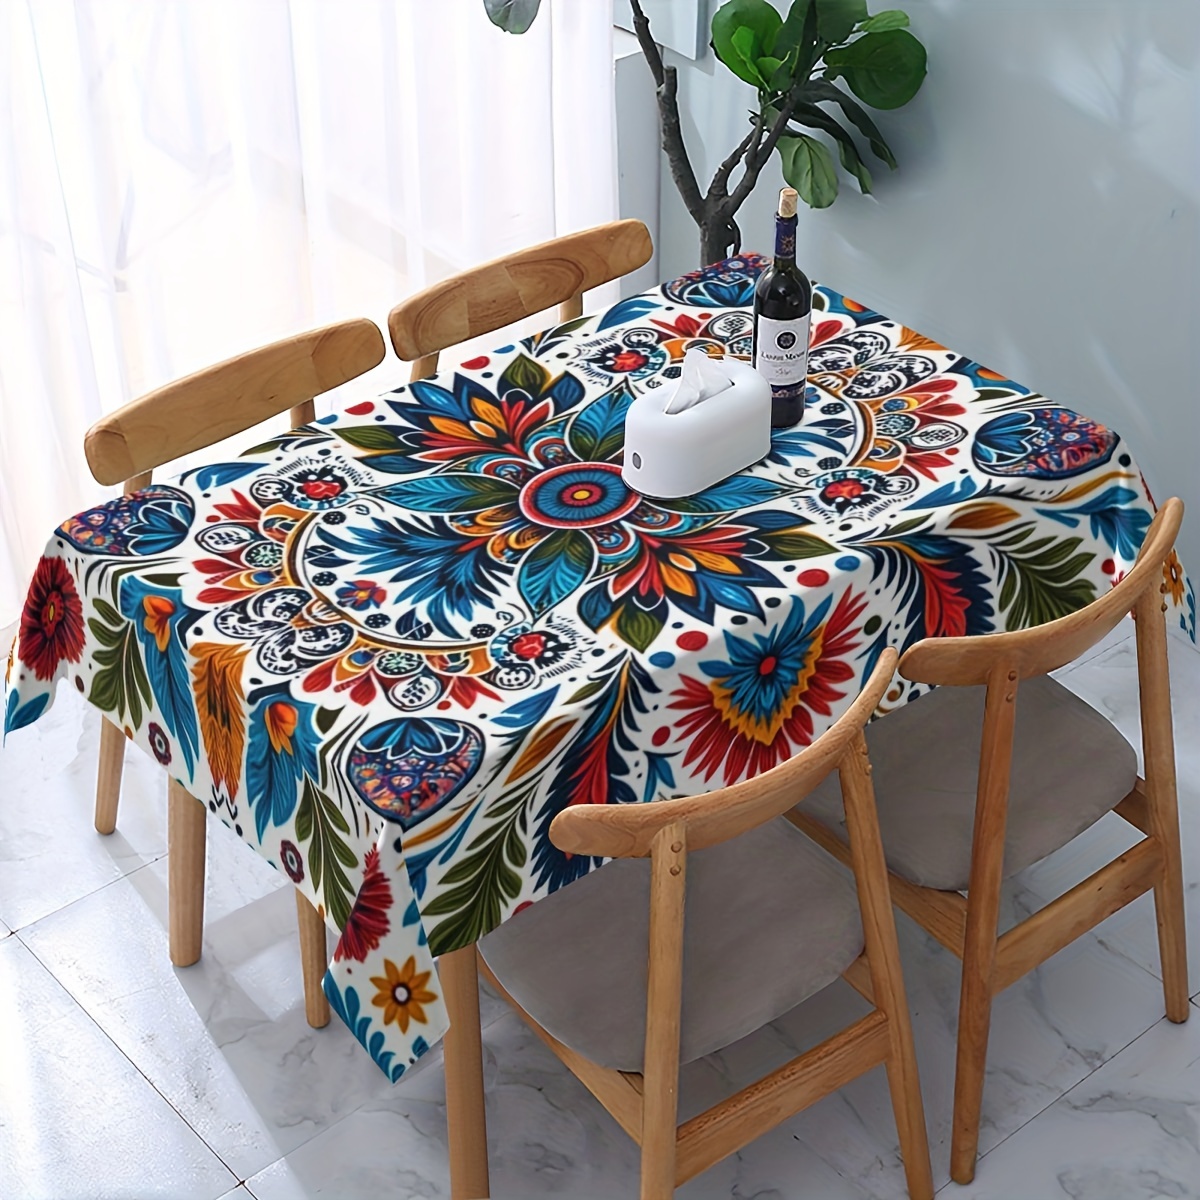 

1pc, Table Cover, Mandala Pattern Polyester Tablecloth, Vibrant Mexican Floral Print, Stain-resistant Washable Fine Fiber, Rectangular Table Cover For Kitchen & Dining, Festive Decor